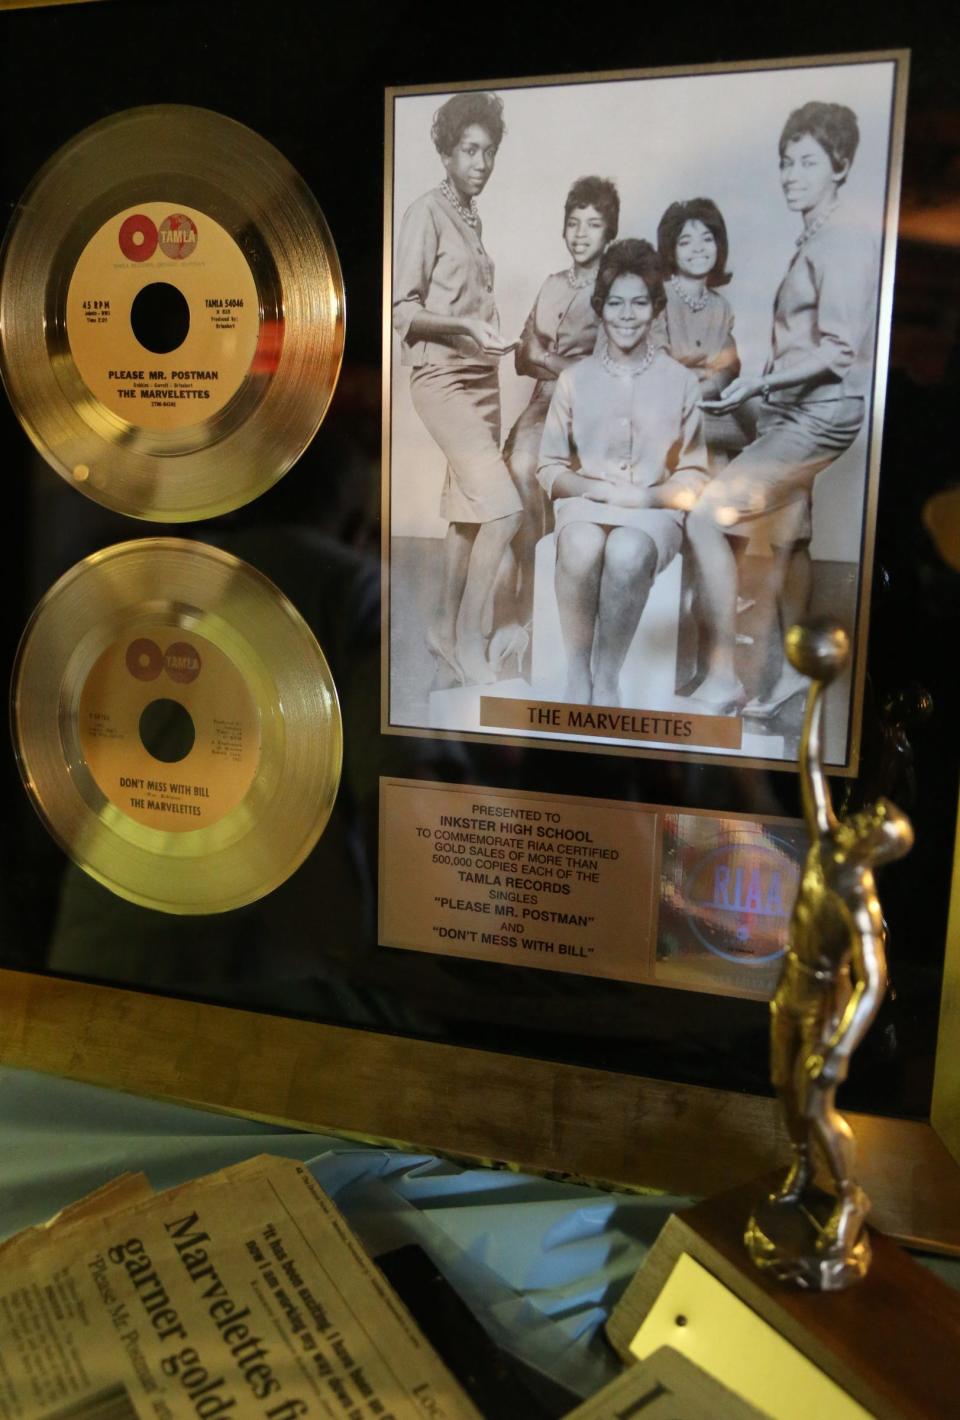 The Gold Record was earned by the Marvelettes alumni of  Inkster High School and collected by DeArtriss Richardson and stored in her basement on April 9, 2015.